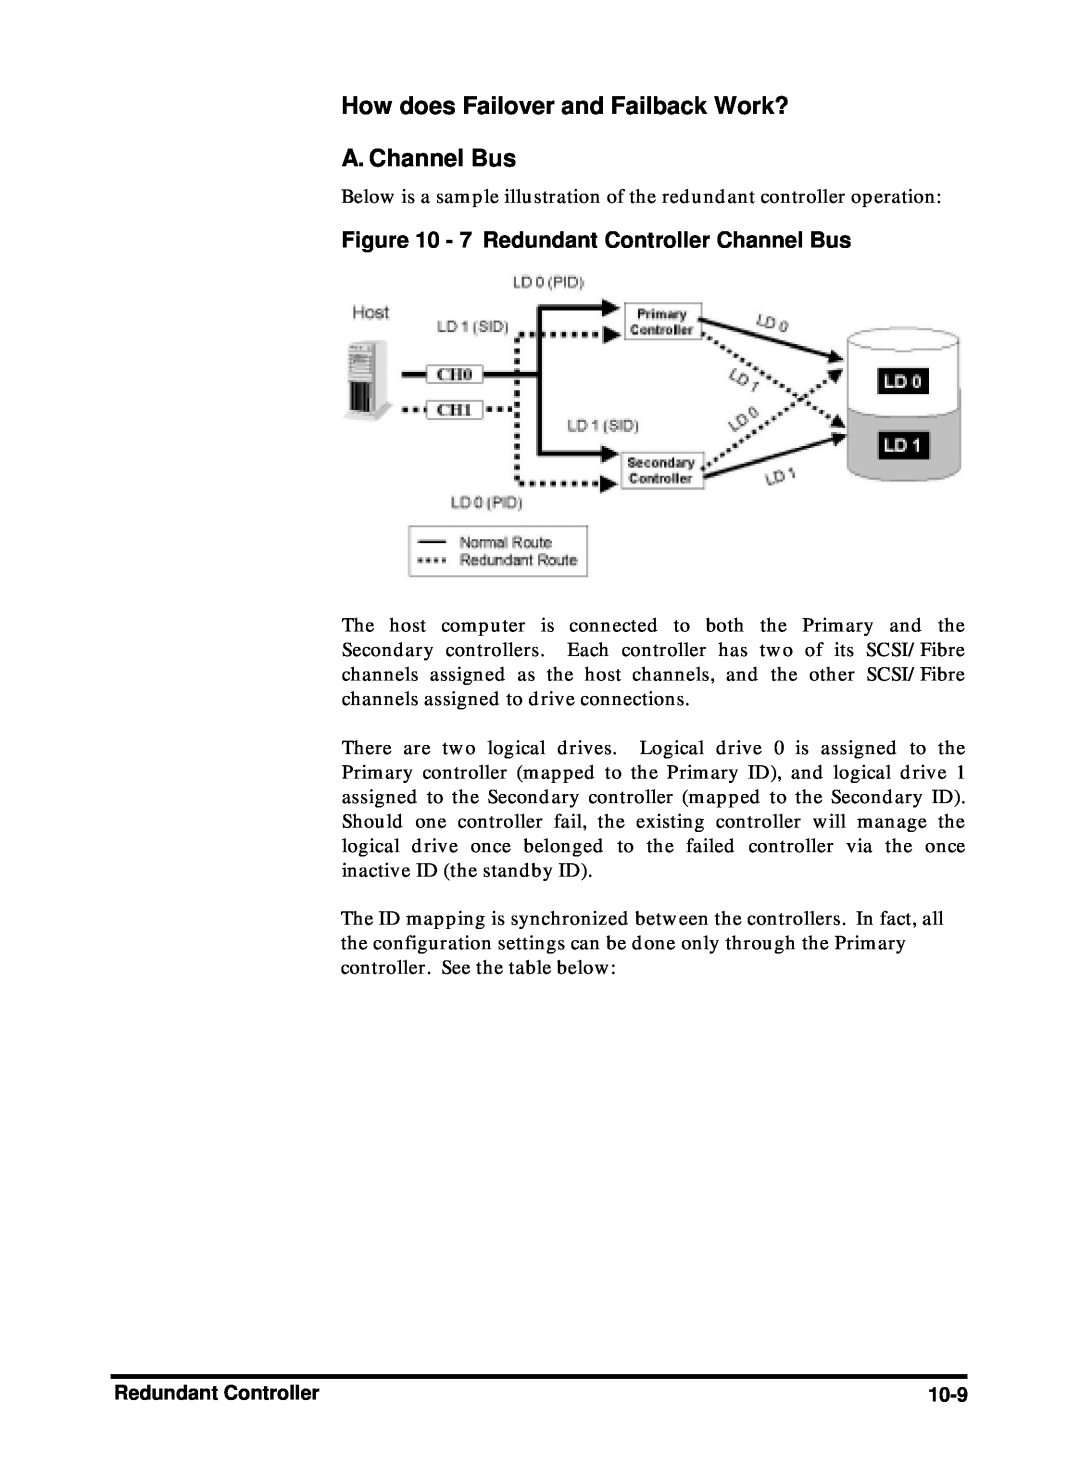 Compaq Infortrend manual How does Failover and Failback Work? A. Channel Bus, 7 Redundant Controller Channel Bus 